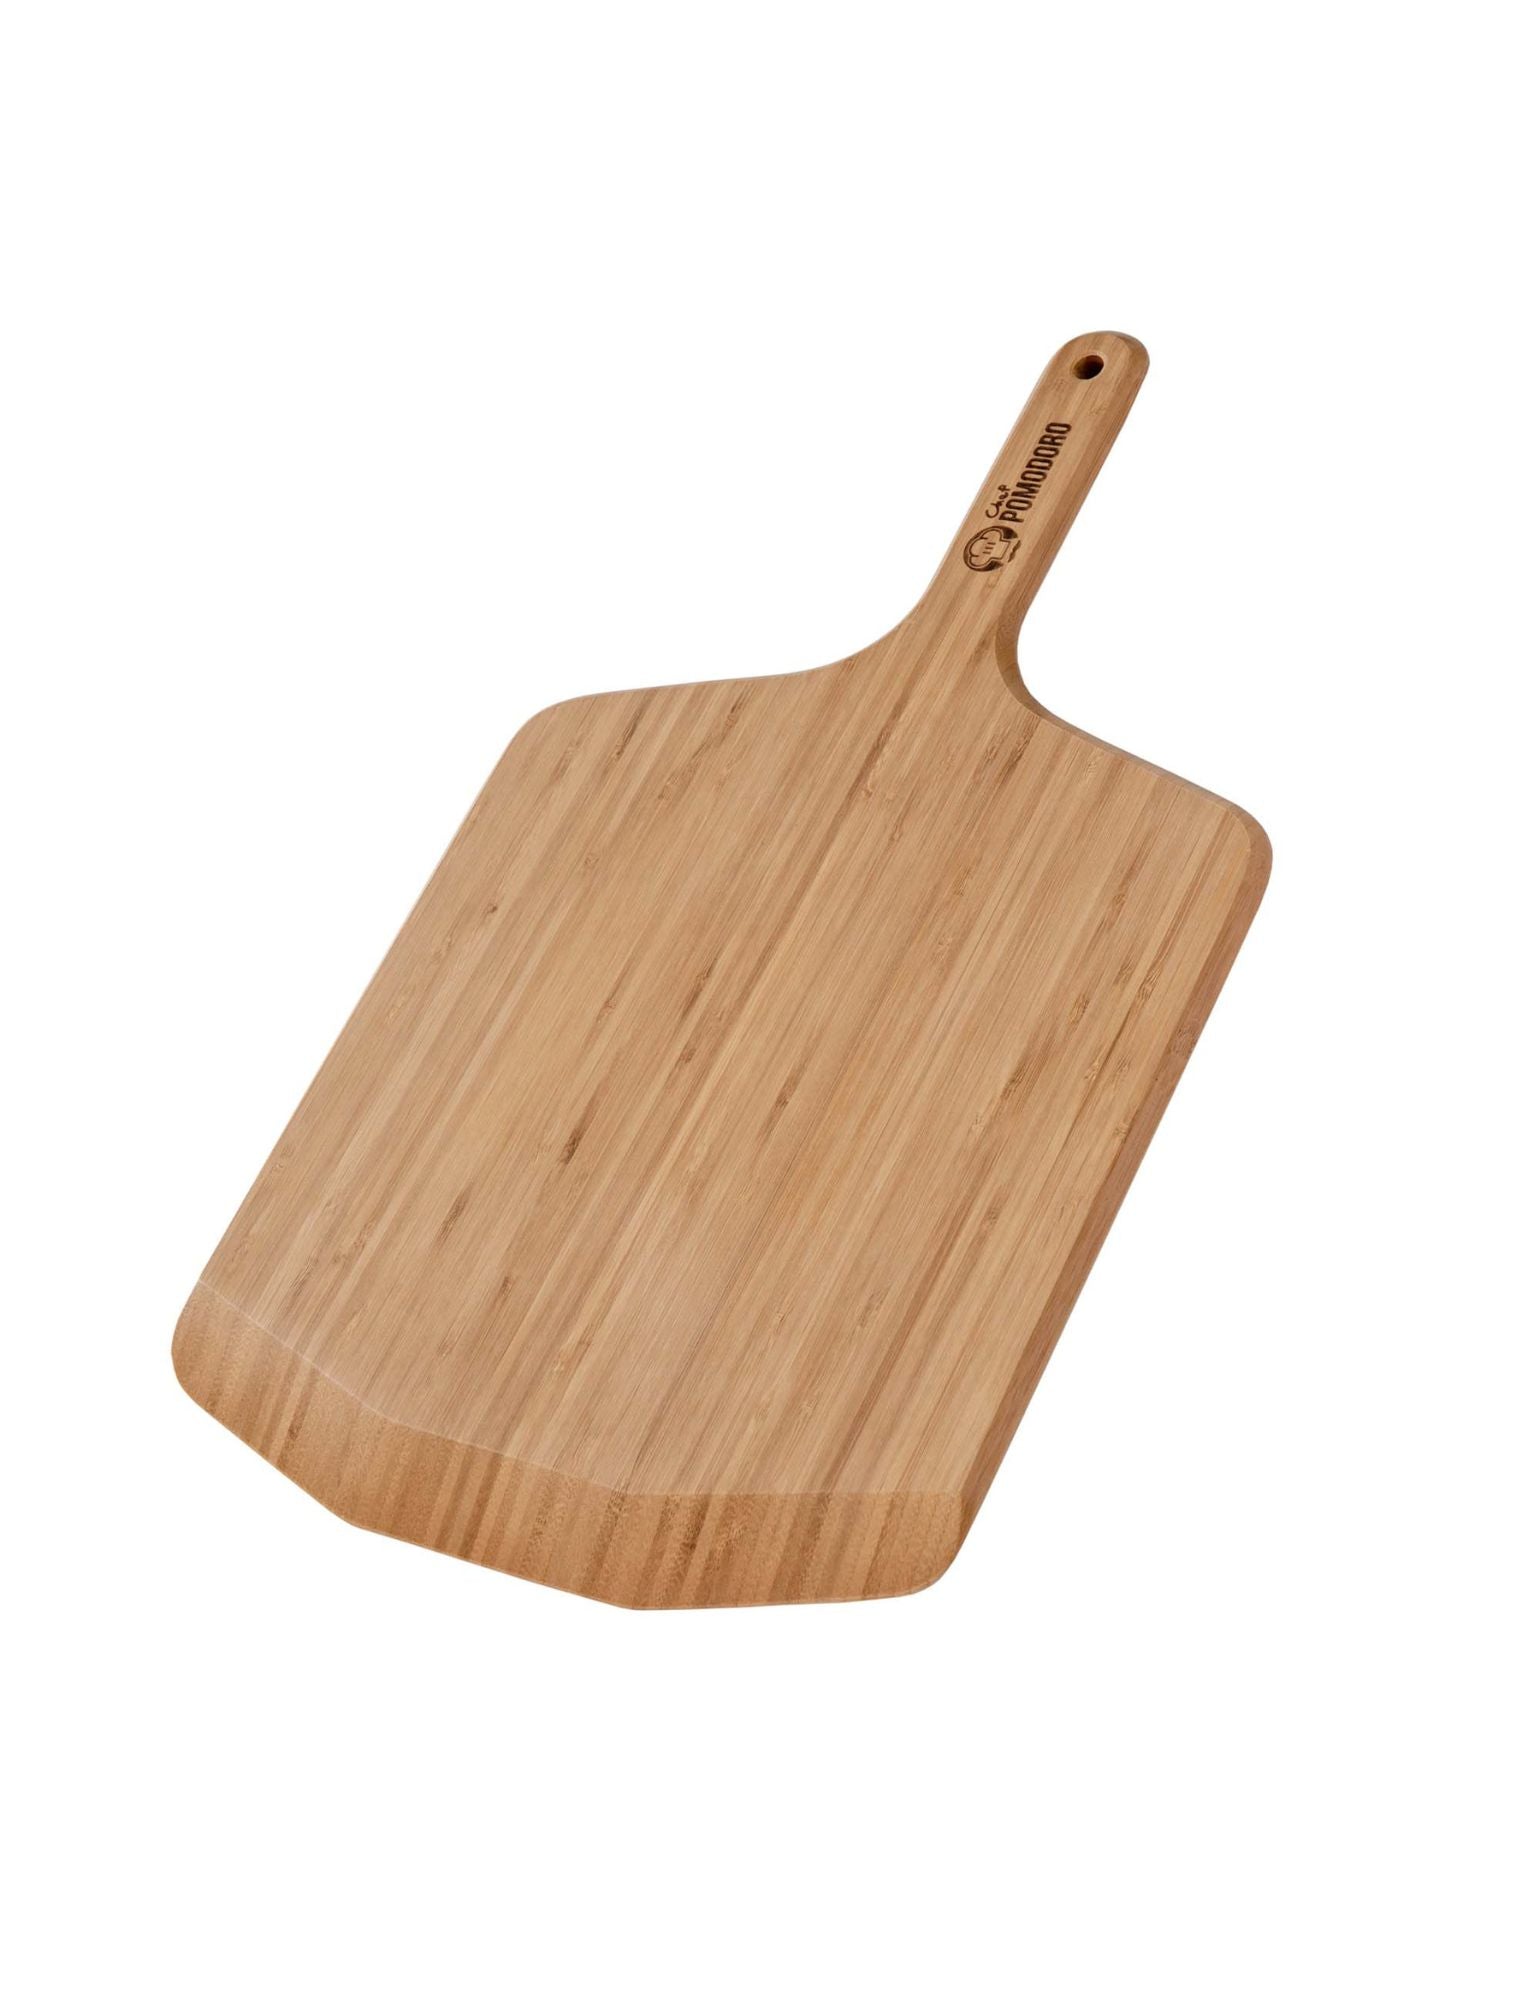 12-inch Bamboo Pizza Peel for Baking Homemade Pizza and Bread